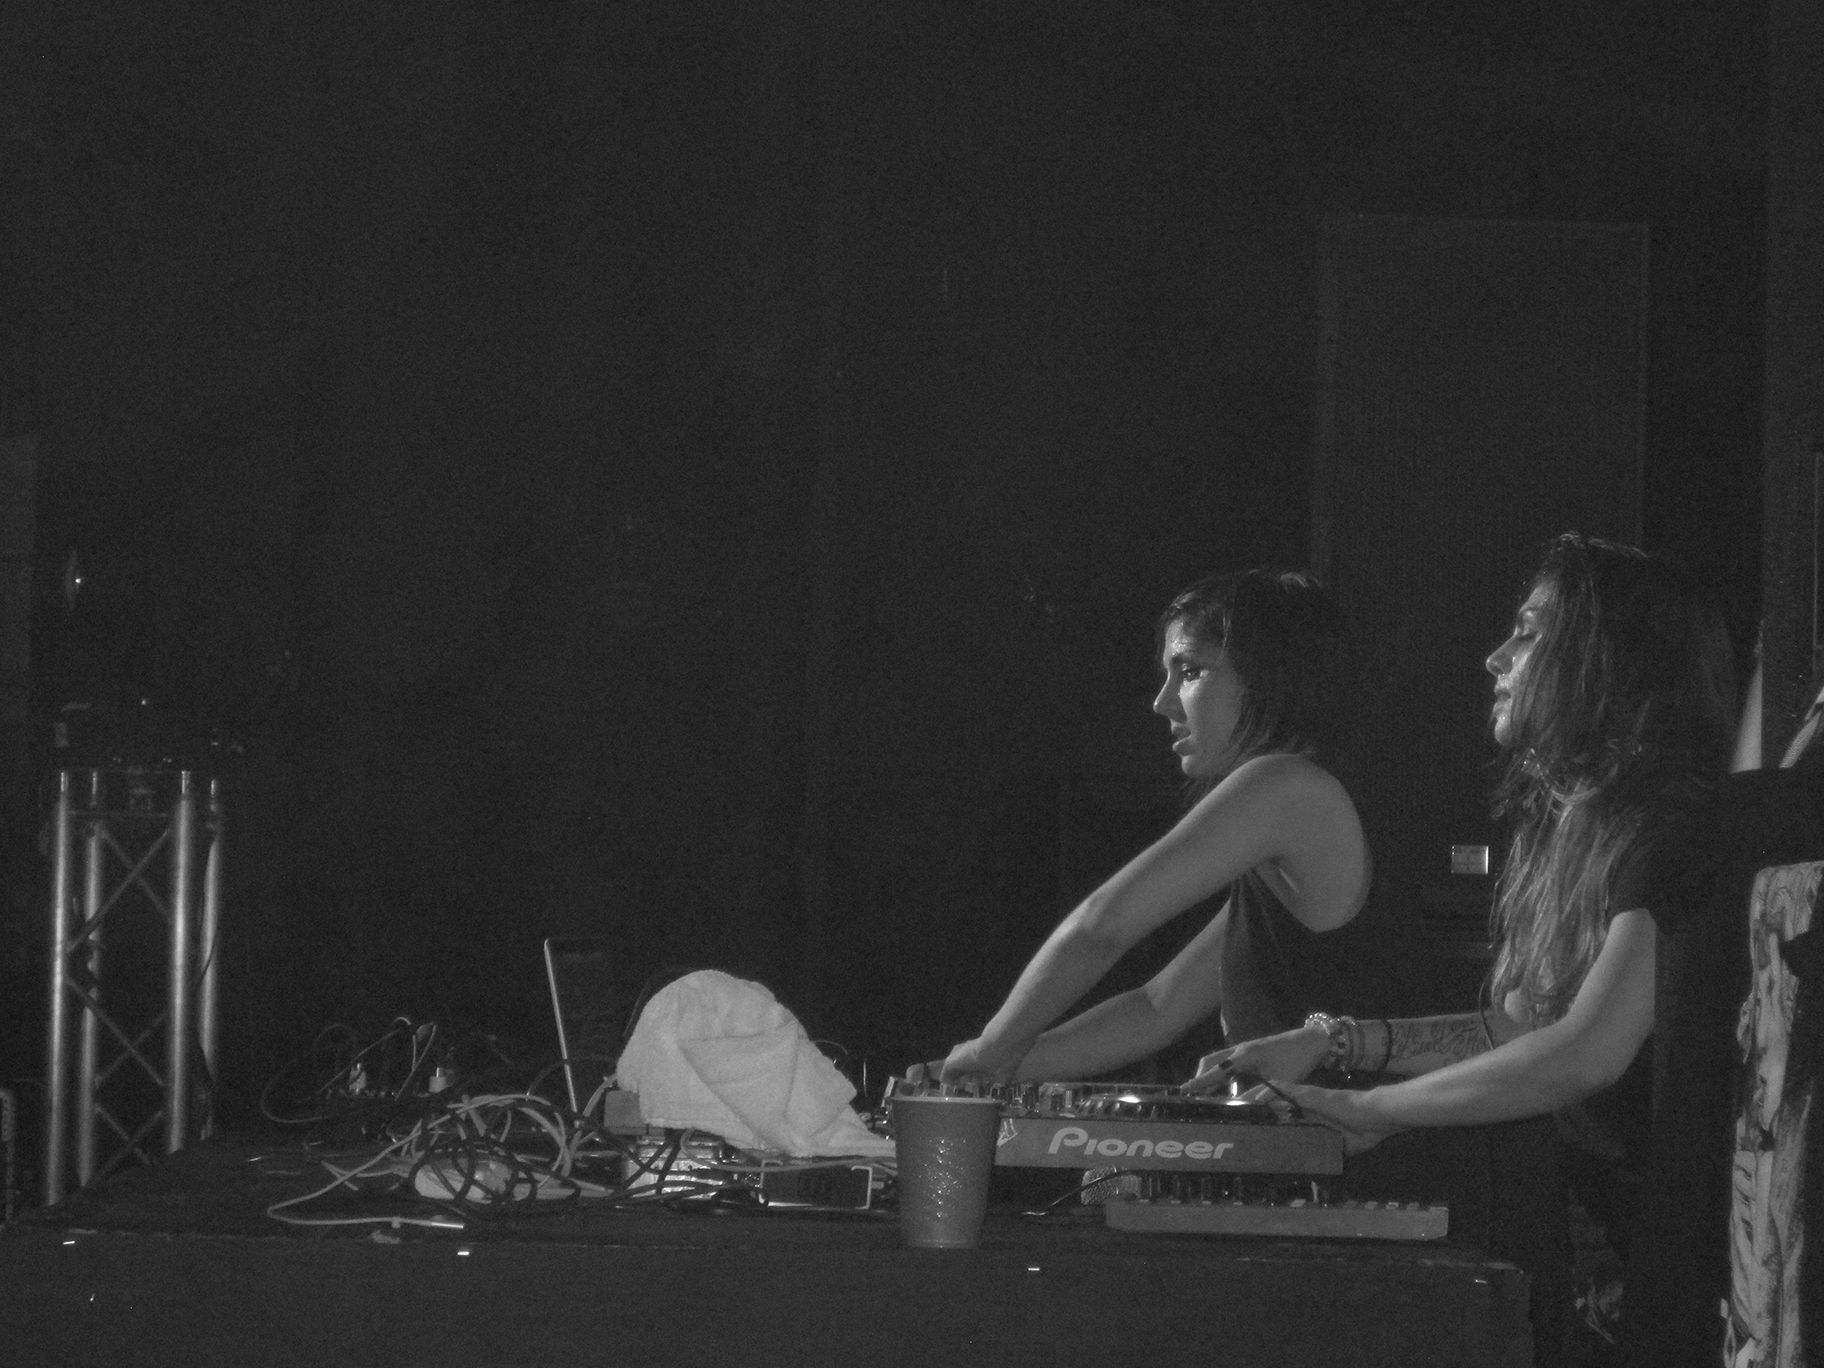 Producer duo Krewella live